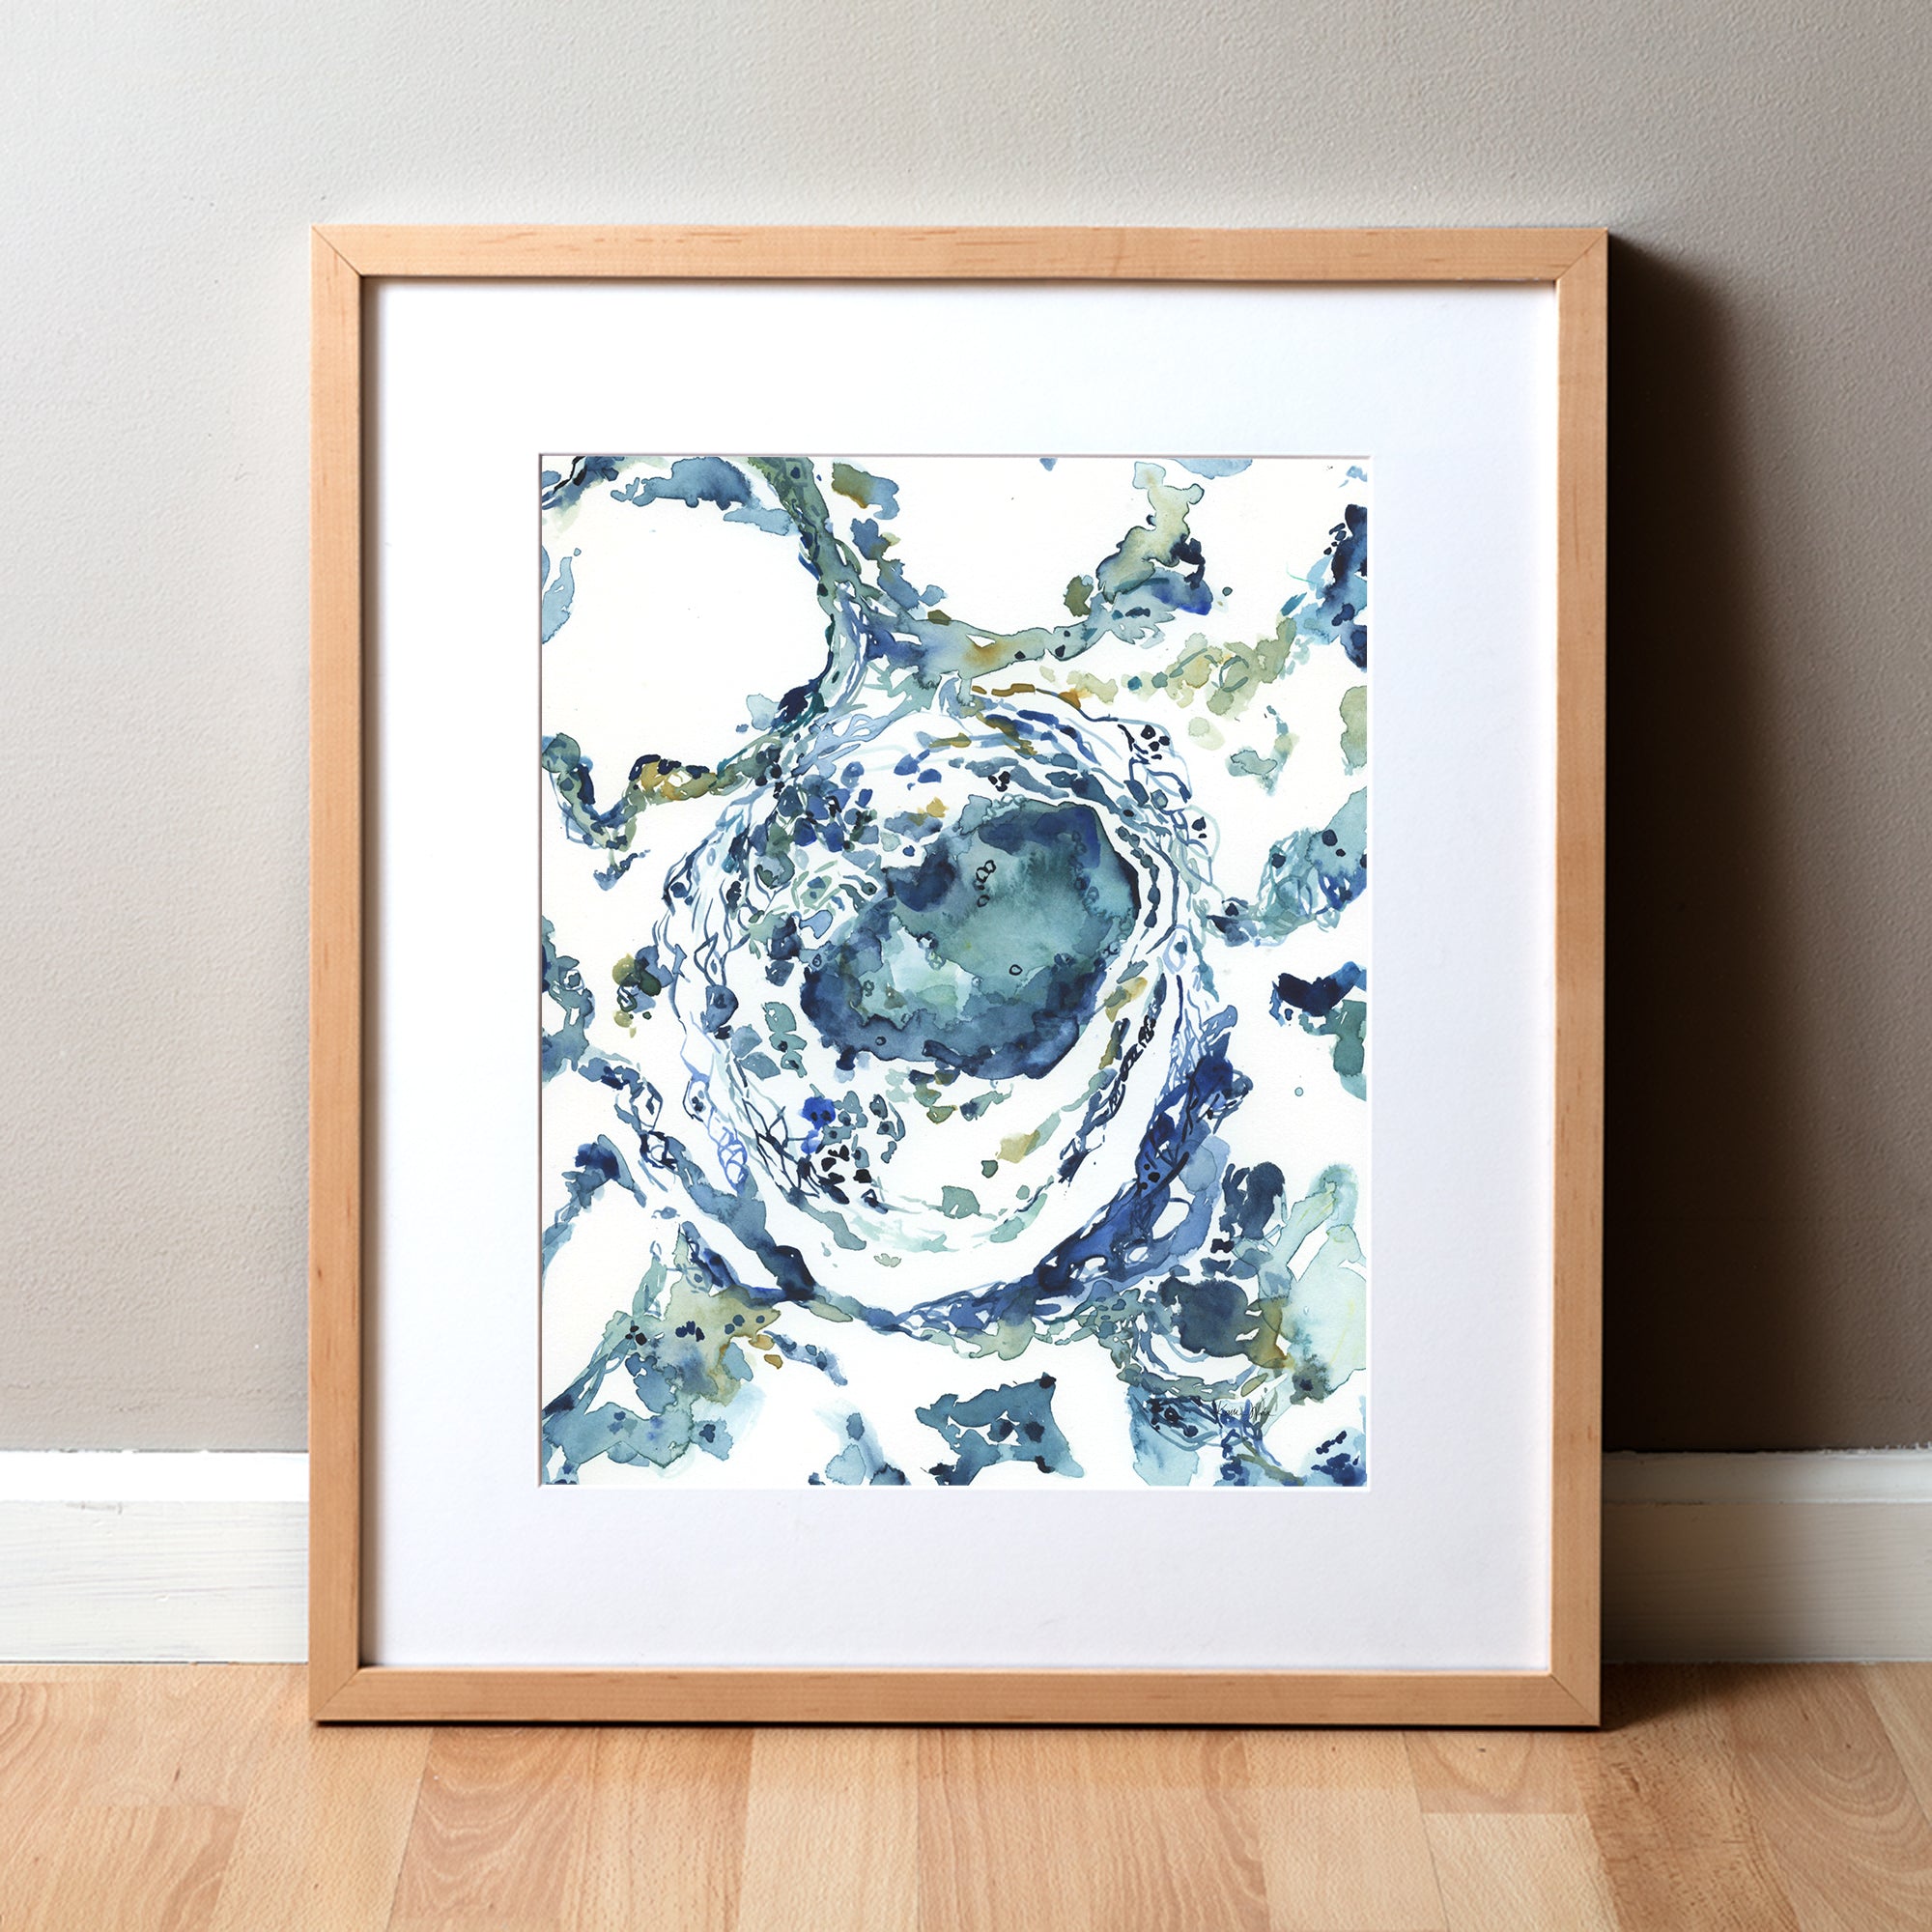 Framed watercolor painting of a granuloma histology in blues and greens